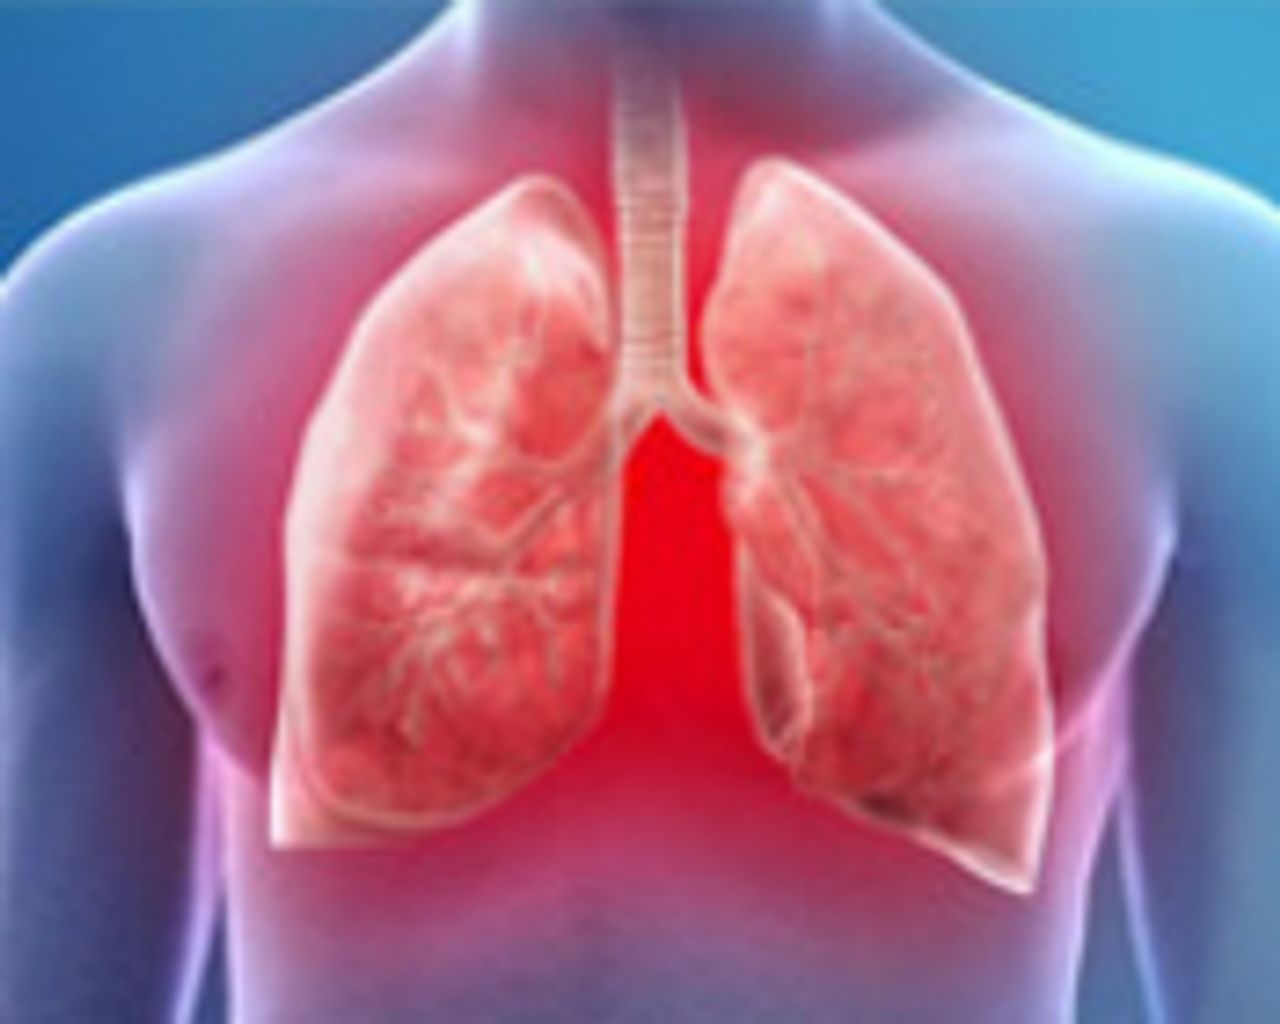 Stock image of lungs that are highlighted.